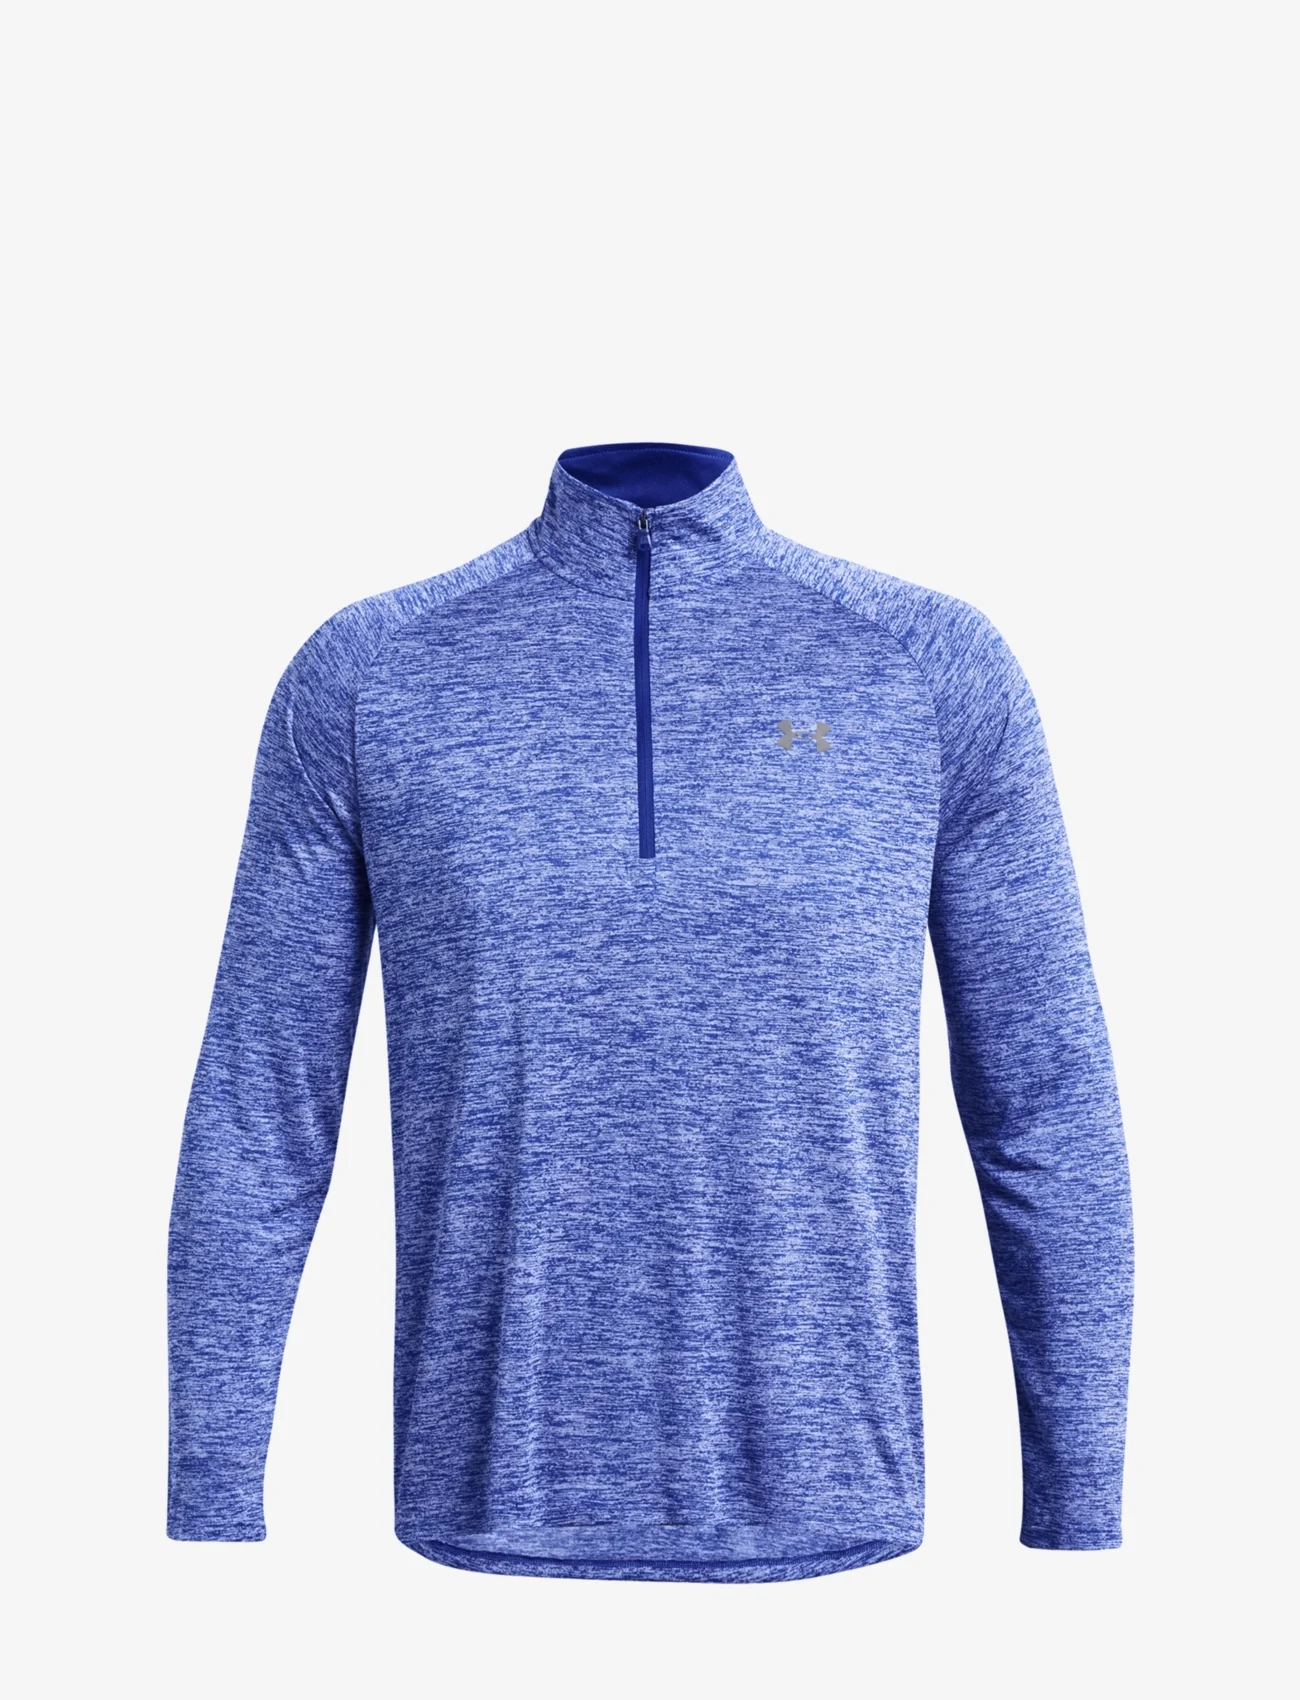 Under Armour - UA Tech 2.0 1/2 Zip - mid layer jackets - royal - 0